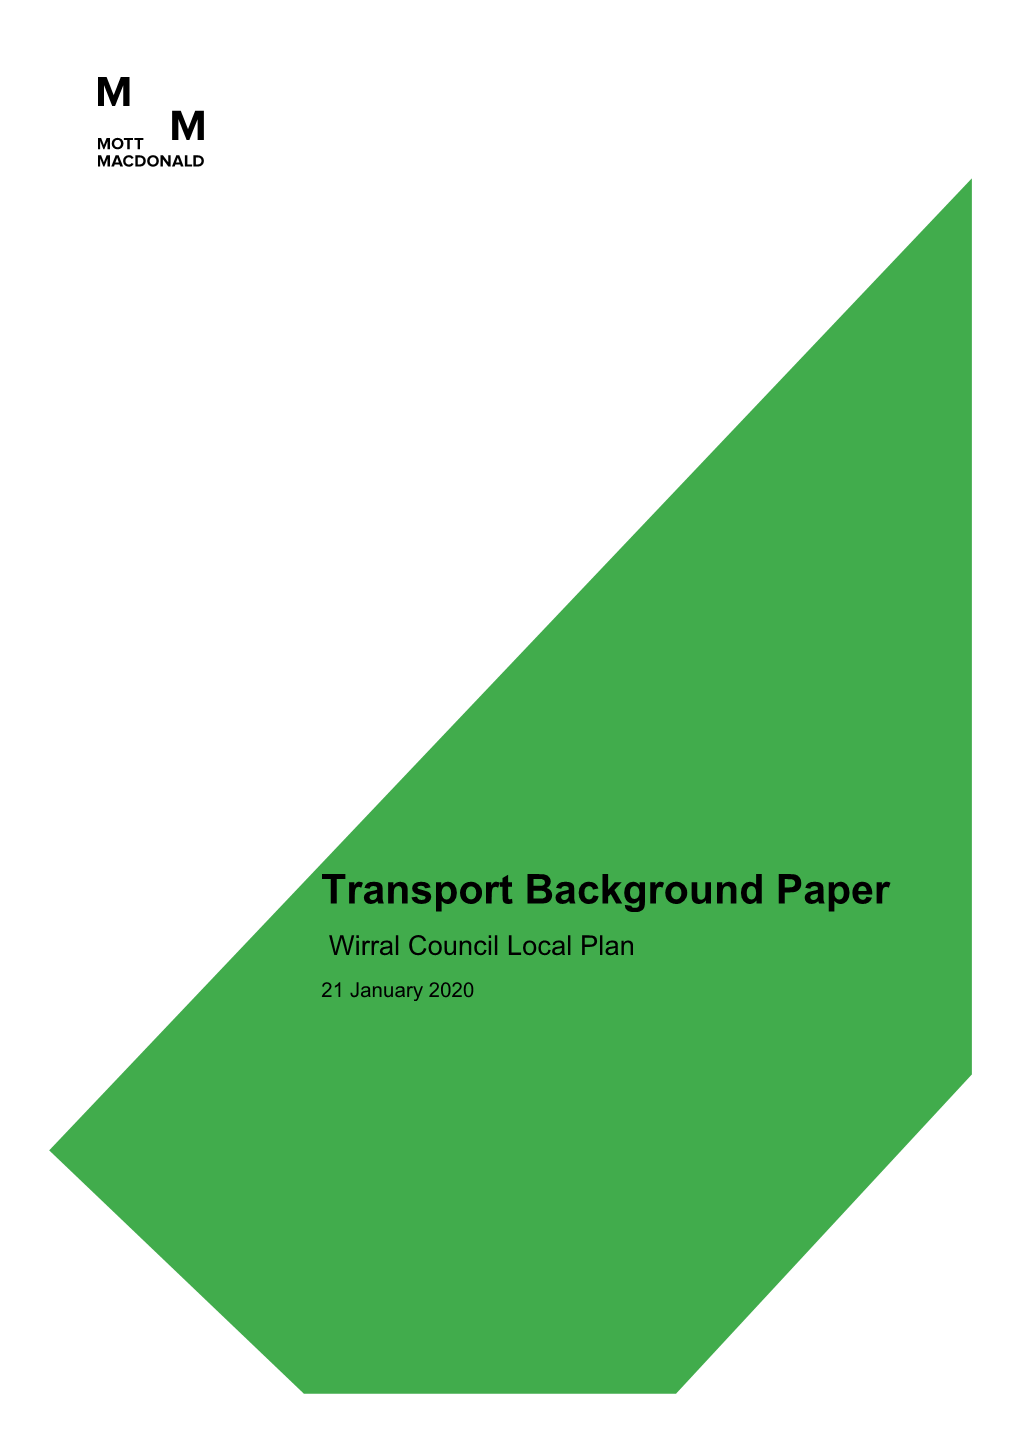 Transport Background Paper Wirral Council Local Plan 21 January 2020